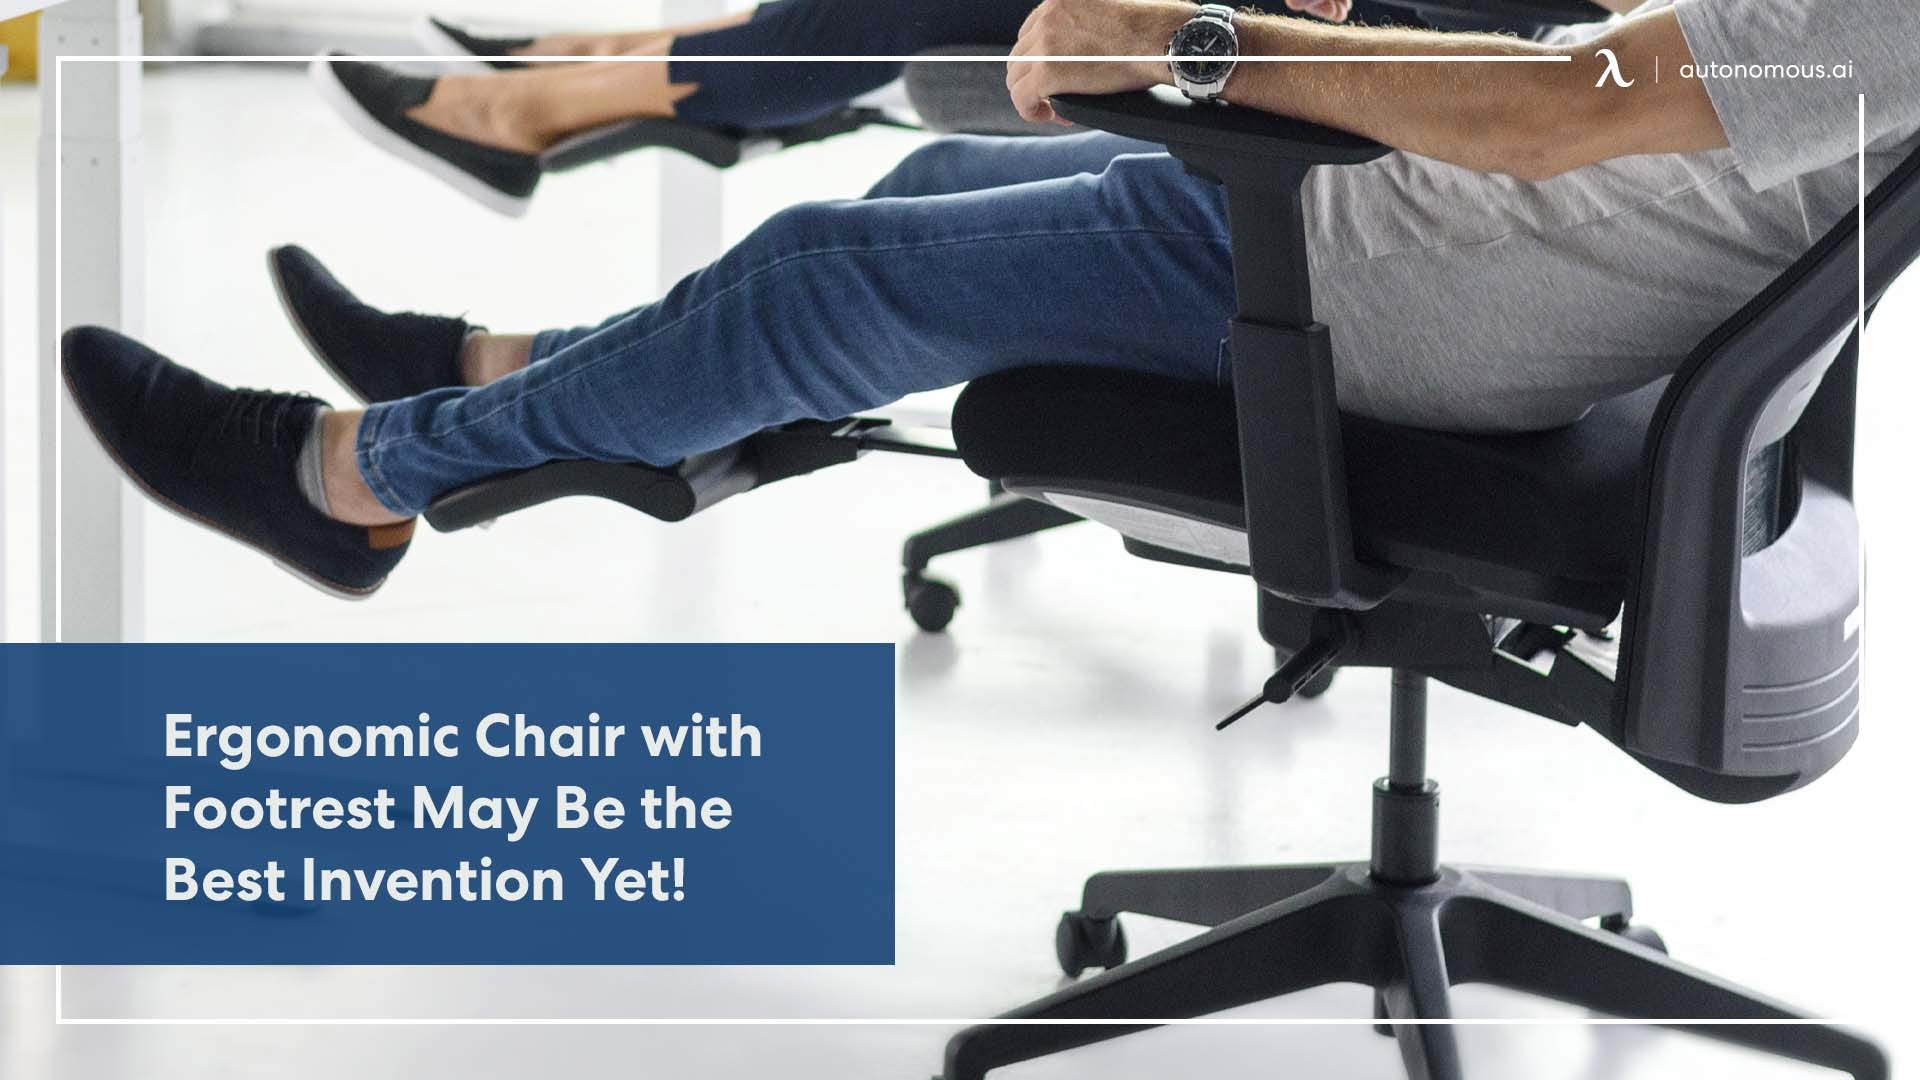 ergonomic chair with footrest may be the best invention yet